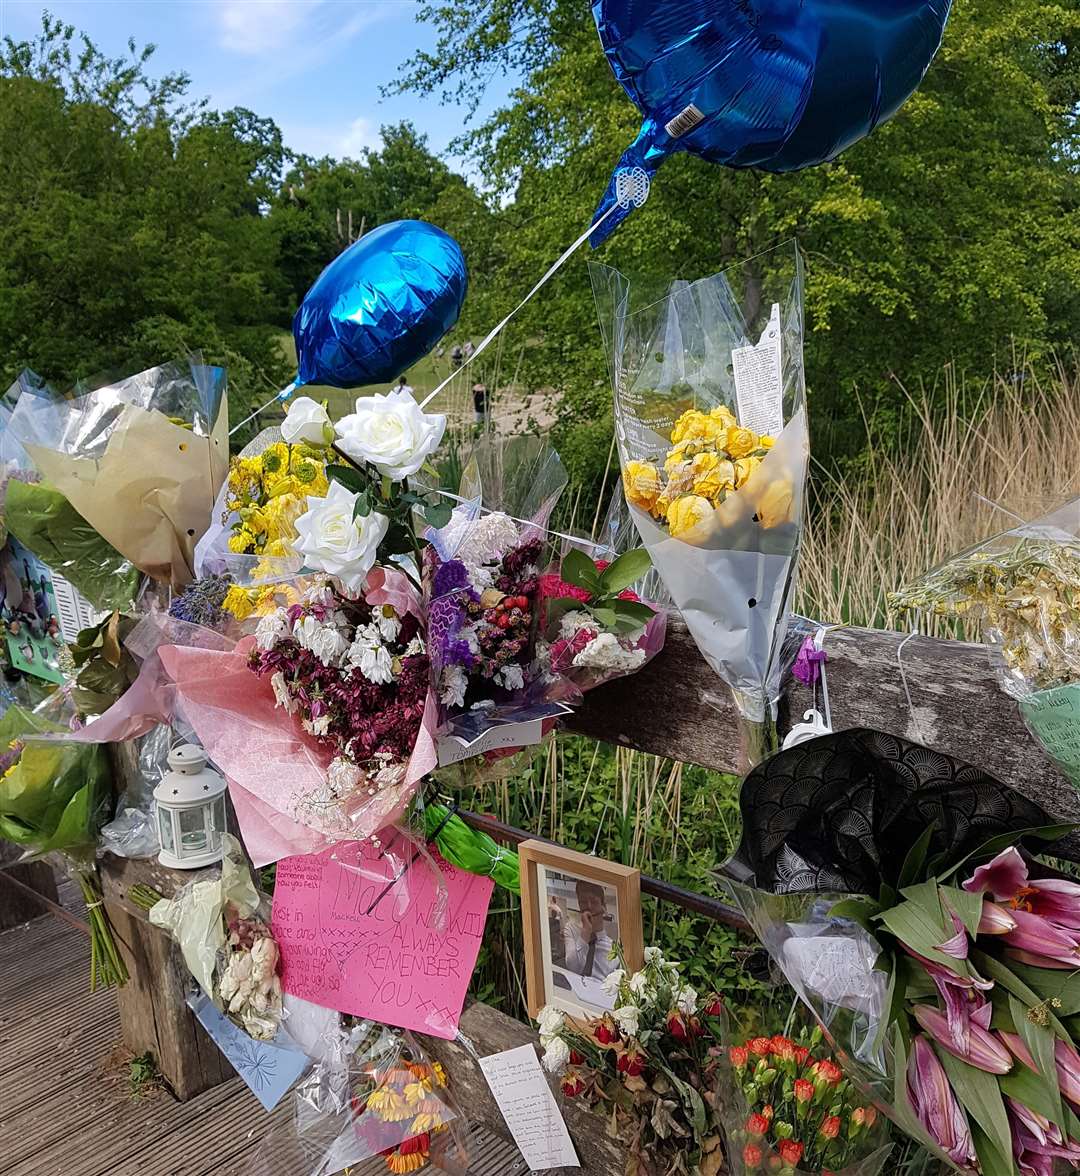 Flowers and messages were placed in Dunorlan Park in Tunbridge Wells in memory of Matthew Mackell